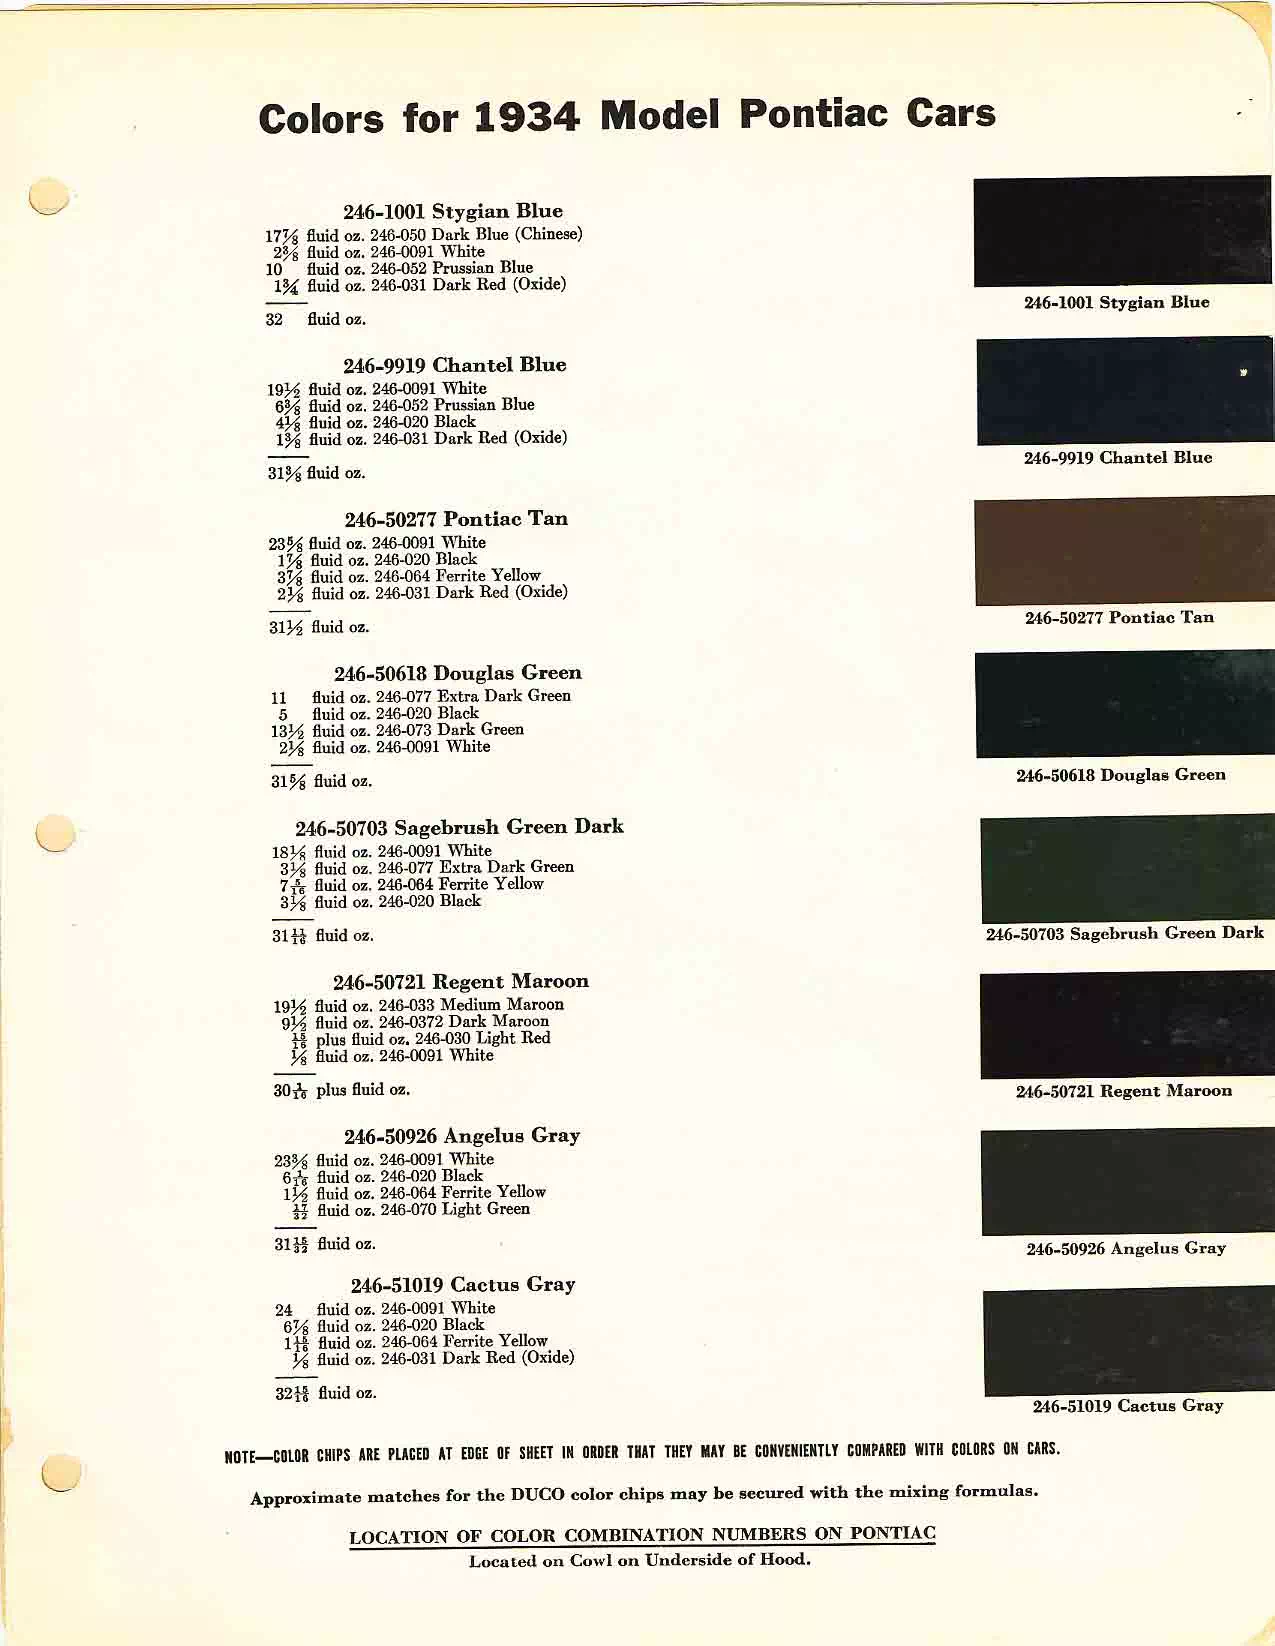 Chart that shows the Colors used on Pontiac Vehicles and the Code to look them up.